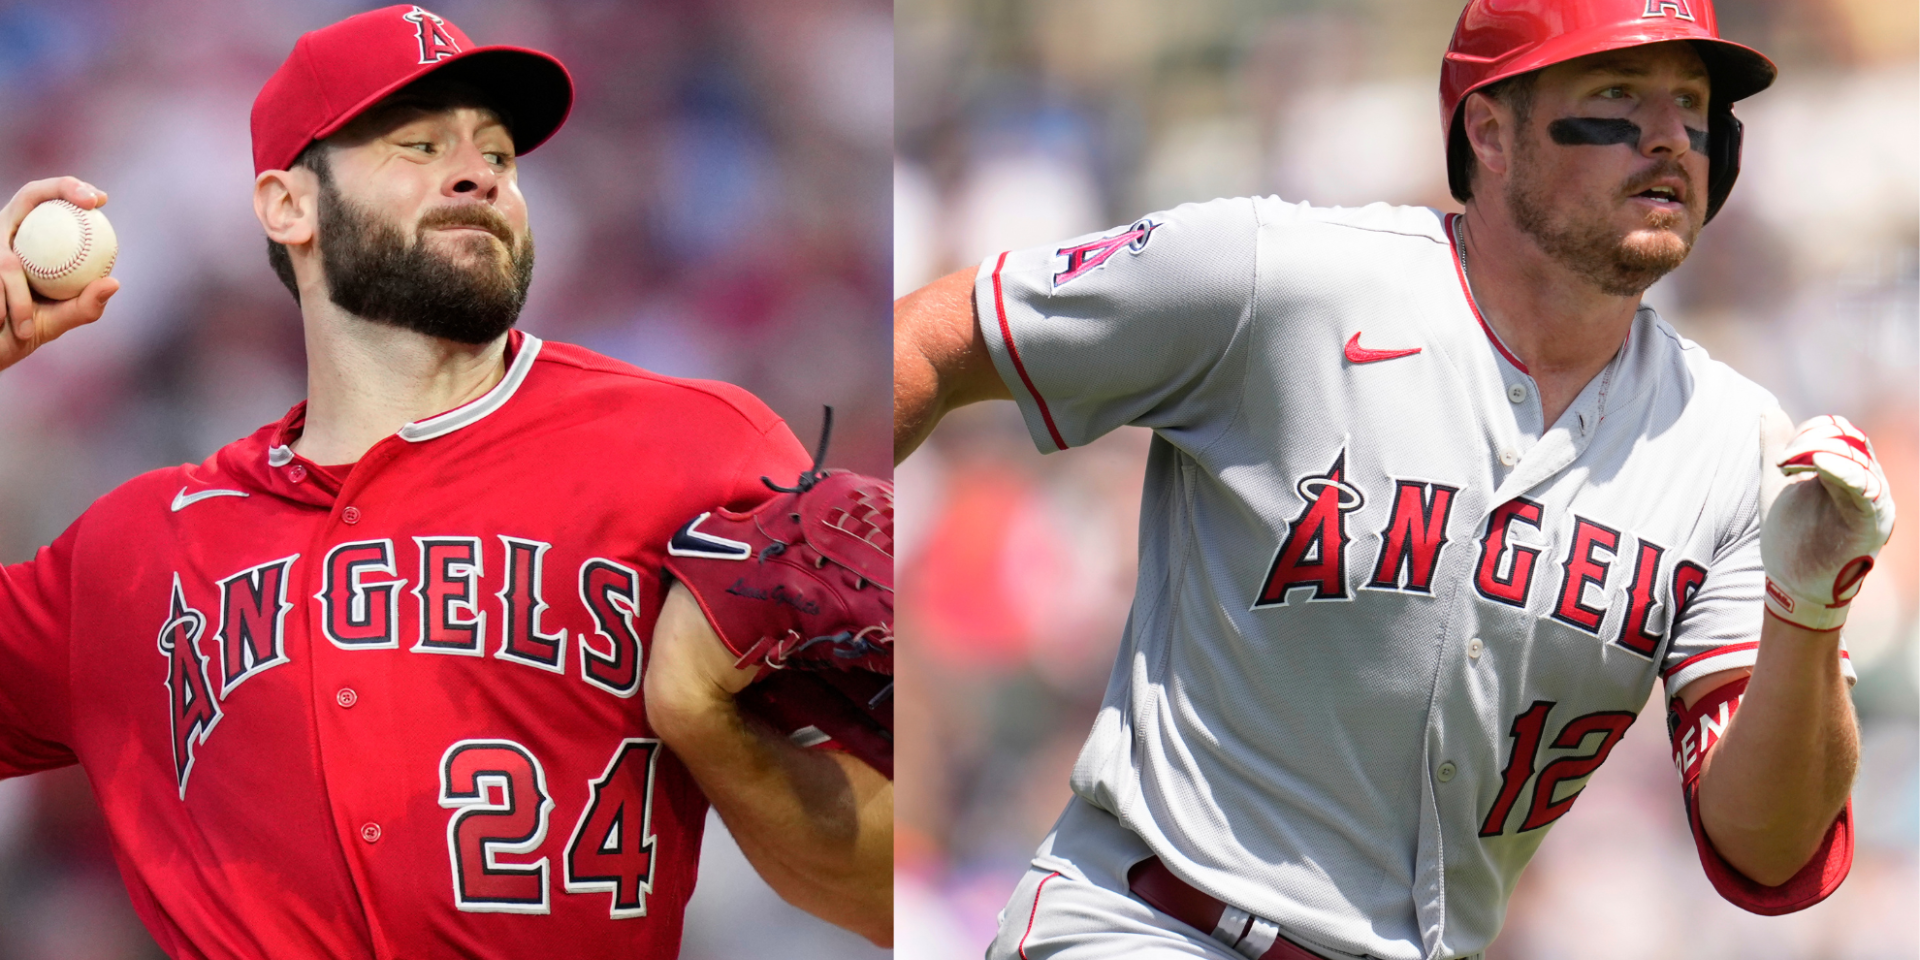 Angels place 5 players, including a star pitcher, on waivers as playoff picture takes shape